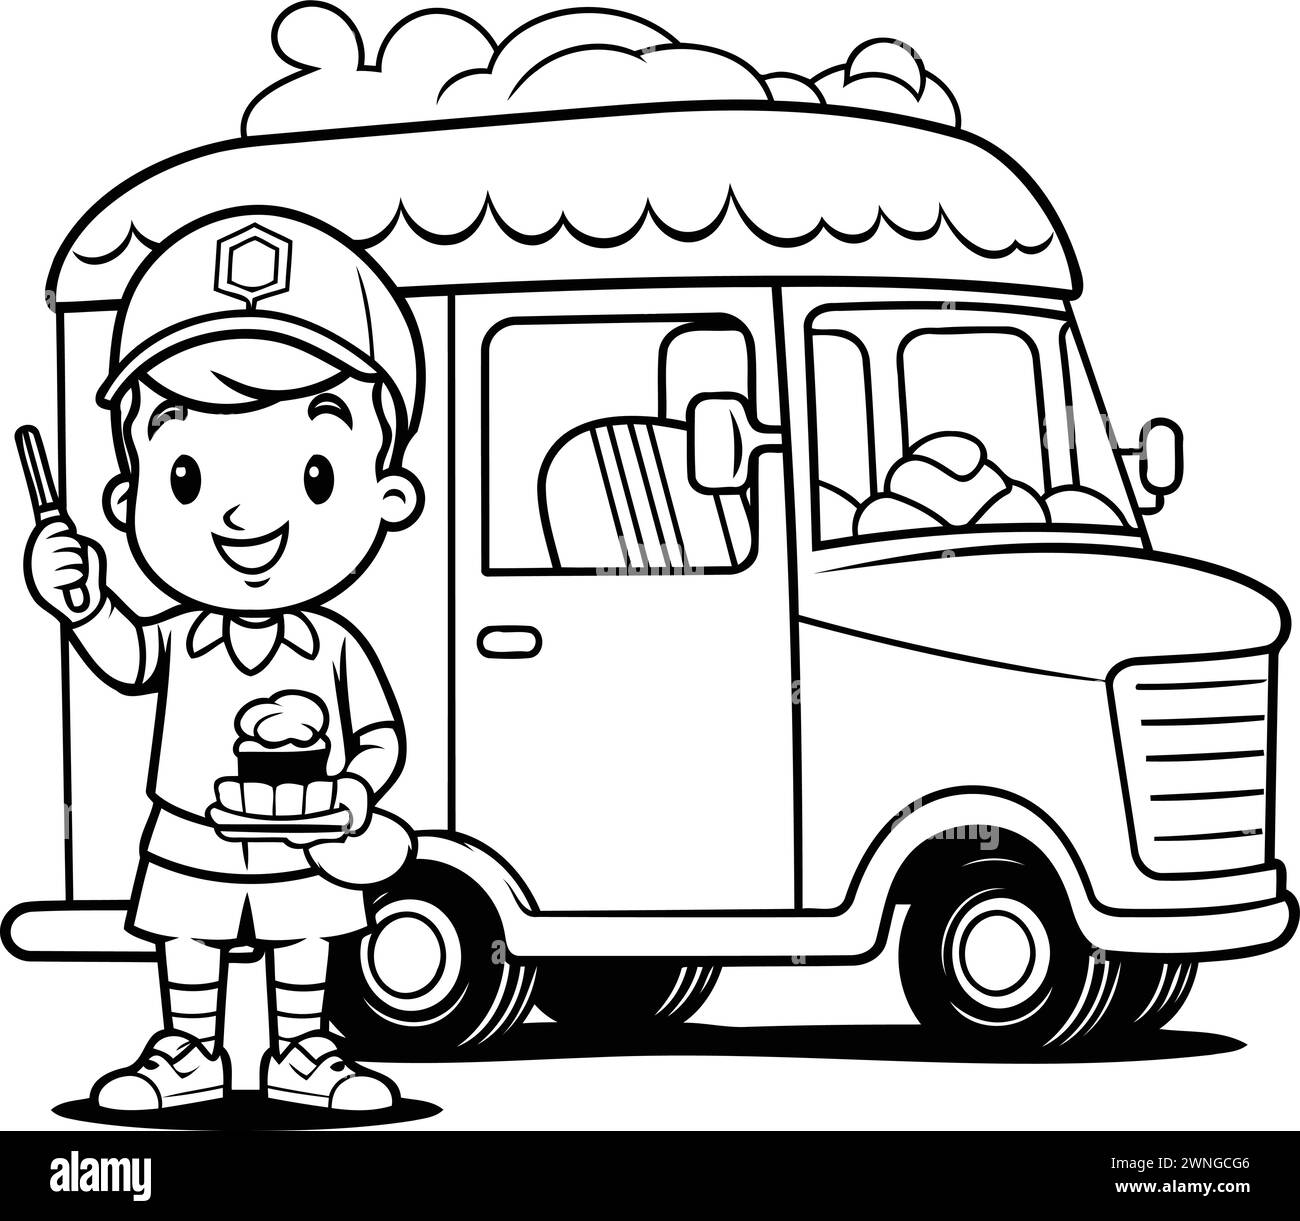 Black and White Cartoon Illustration of Cute Little Boy with Ice Cream Truck for Coloring Book Stock Vector